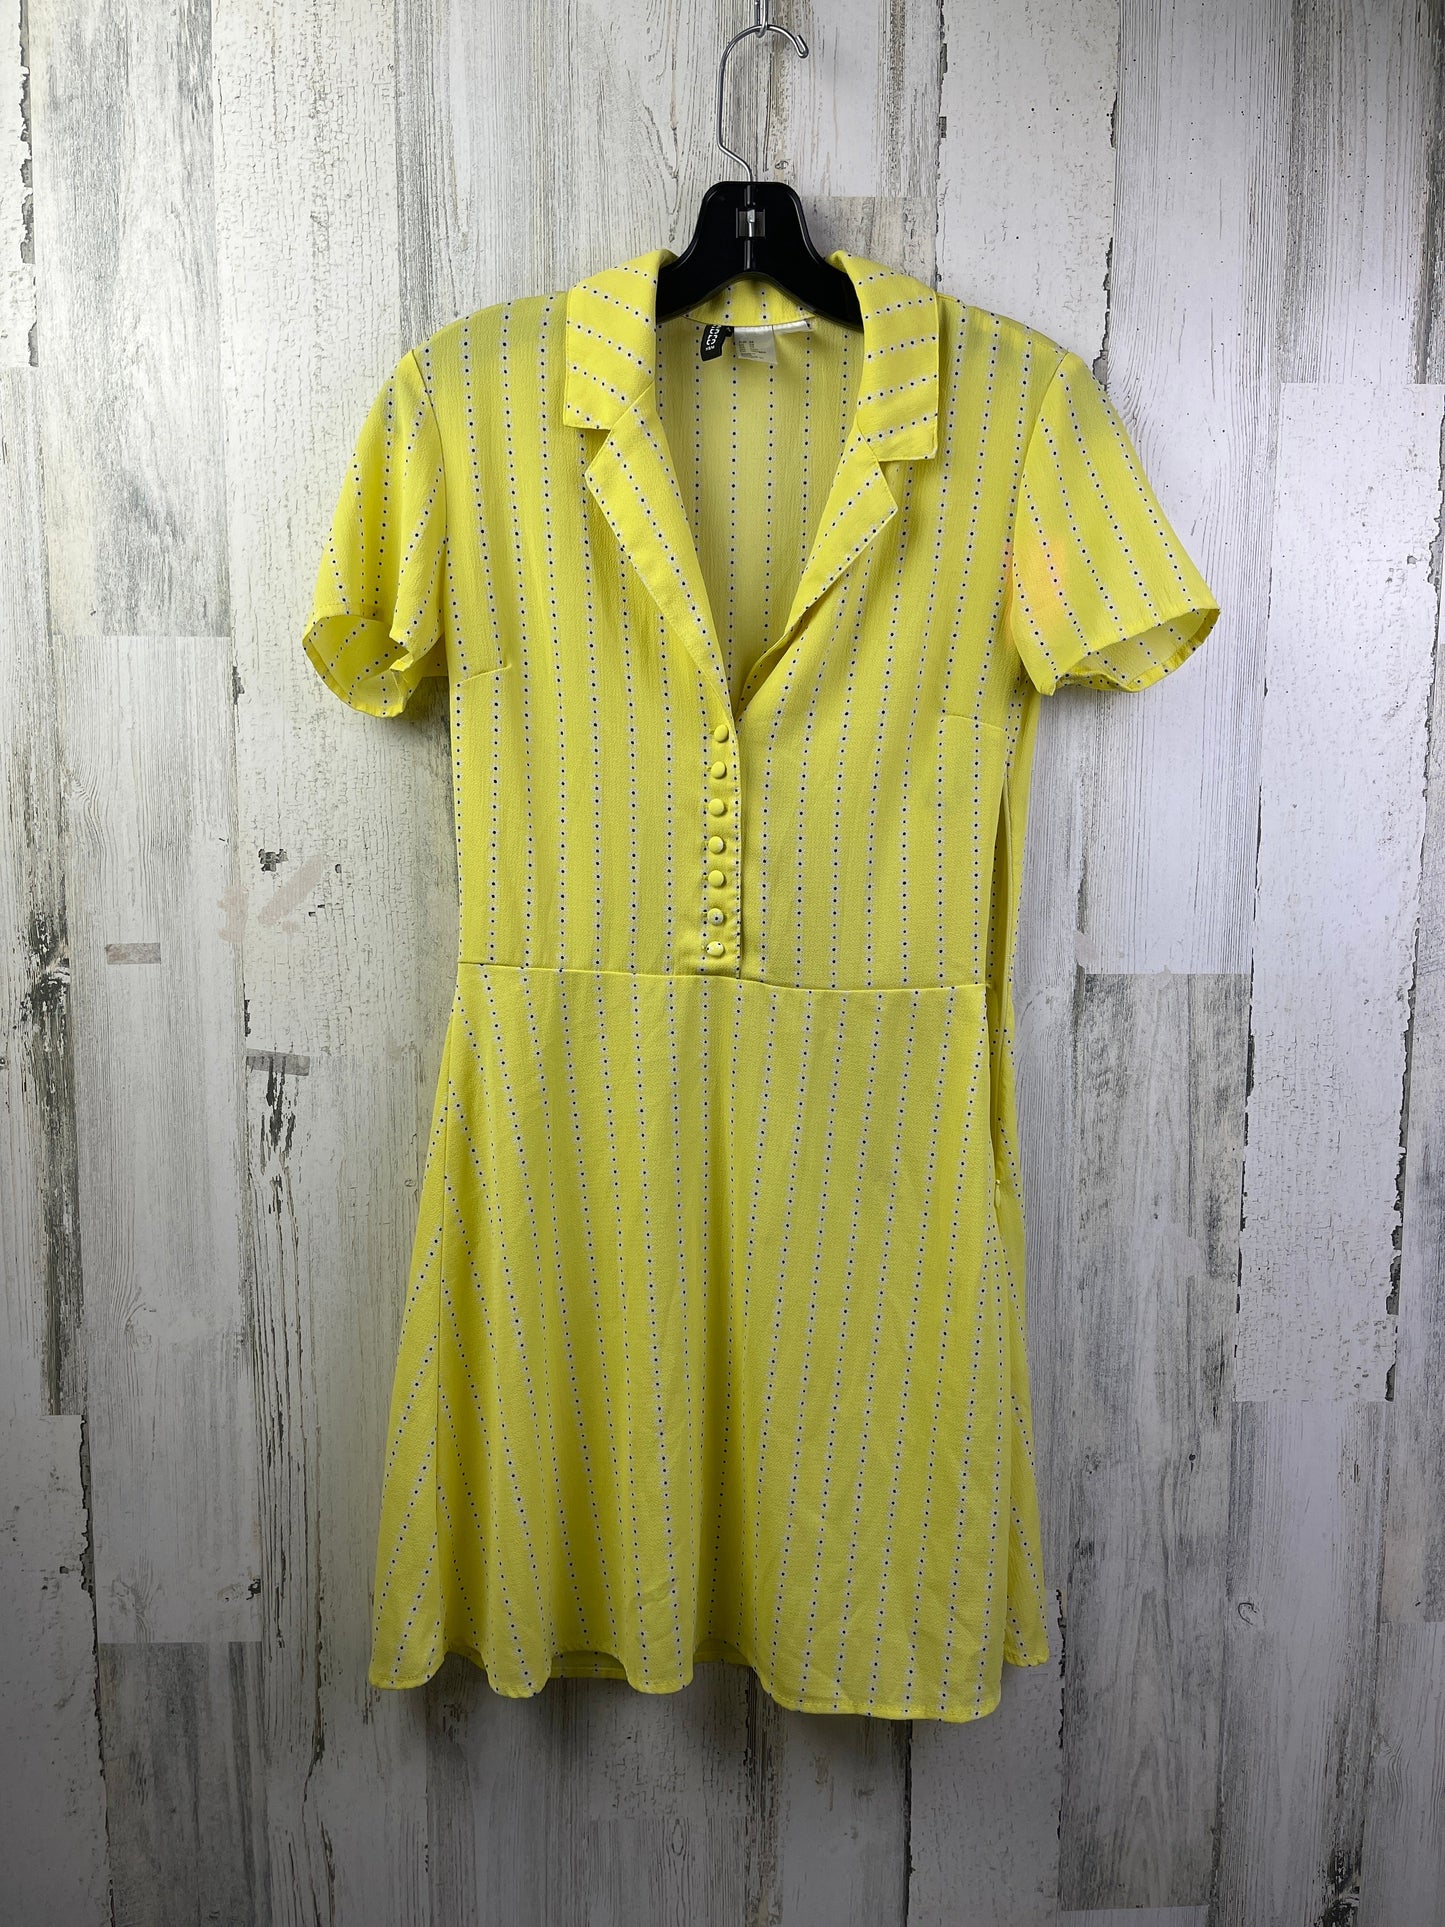 Yellow Dress Casual Short Divided, Size M